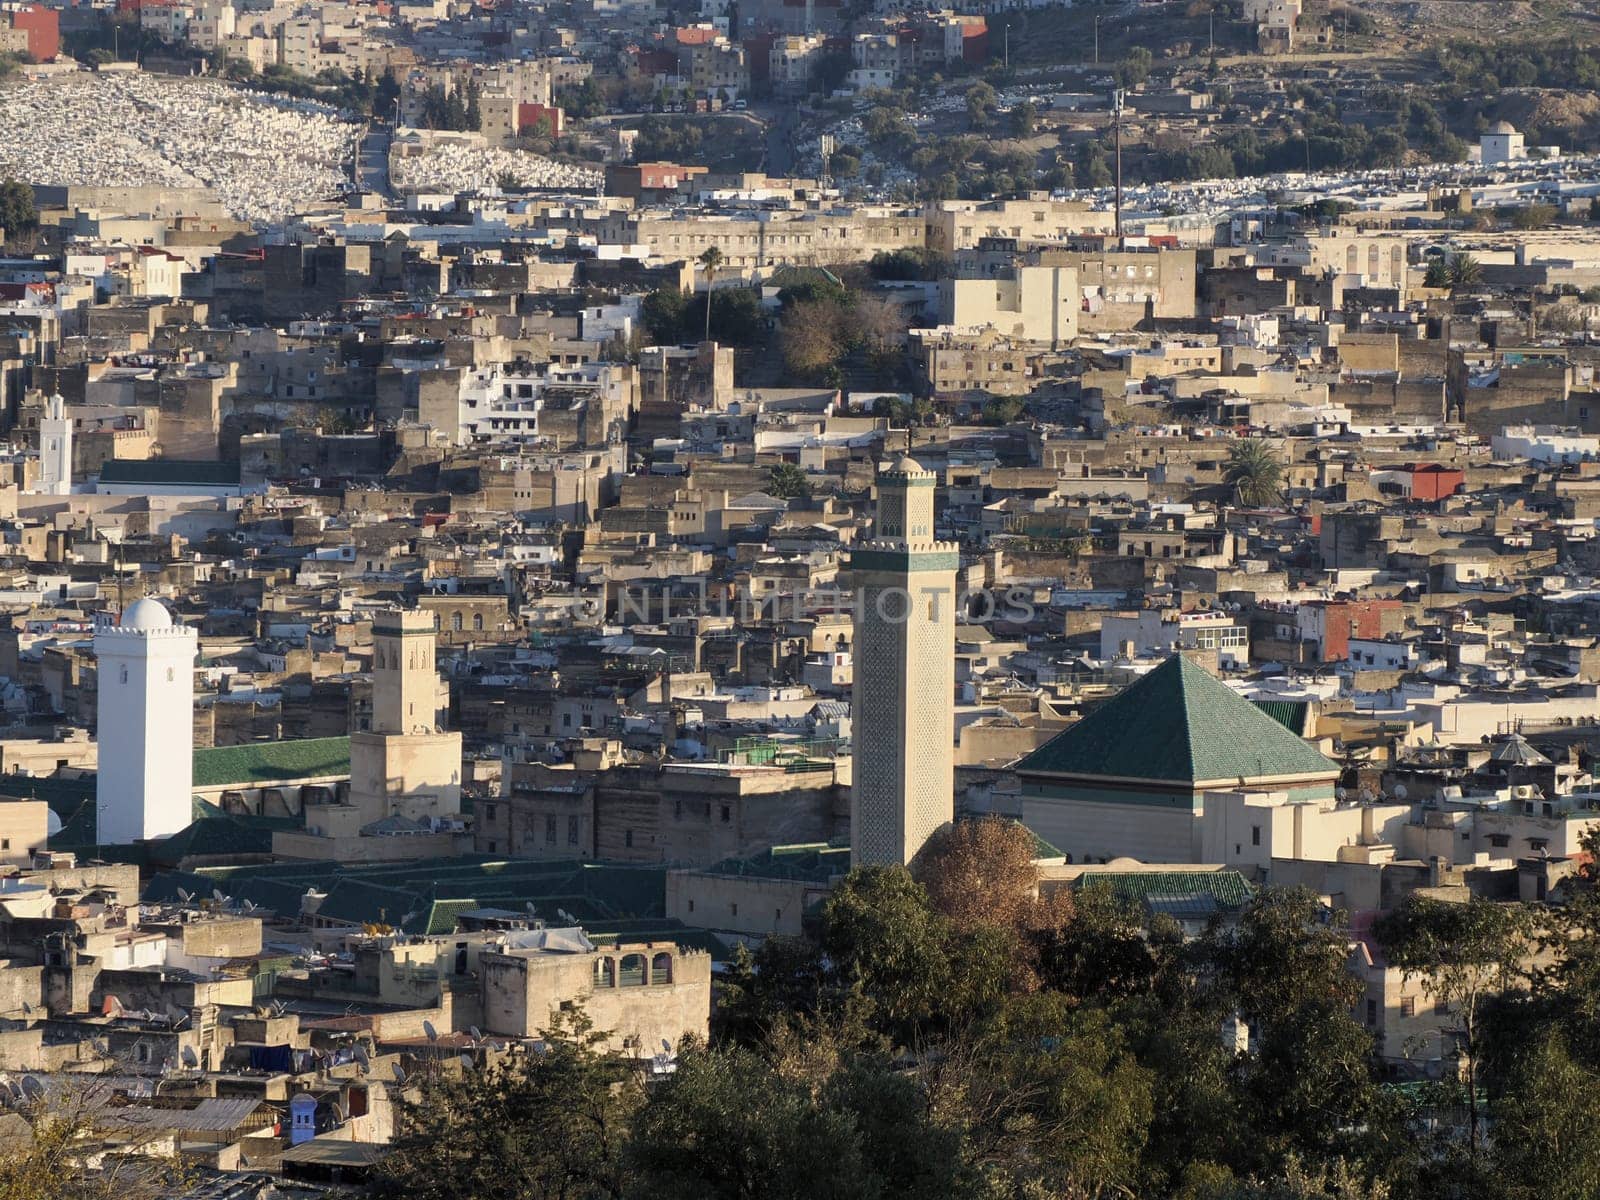 detail of mosque tower Aerial view panorama of the Fez el Bali medina Morocco. Fes el Bali was founded as the capital of the Idrisid dynasty between 789 and 808 AD. by AndreaIzzotti